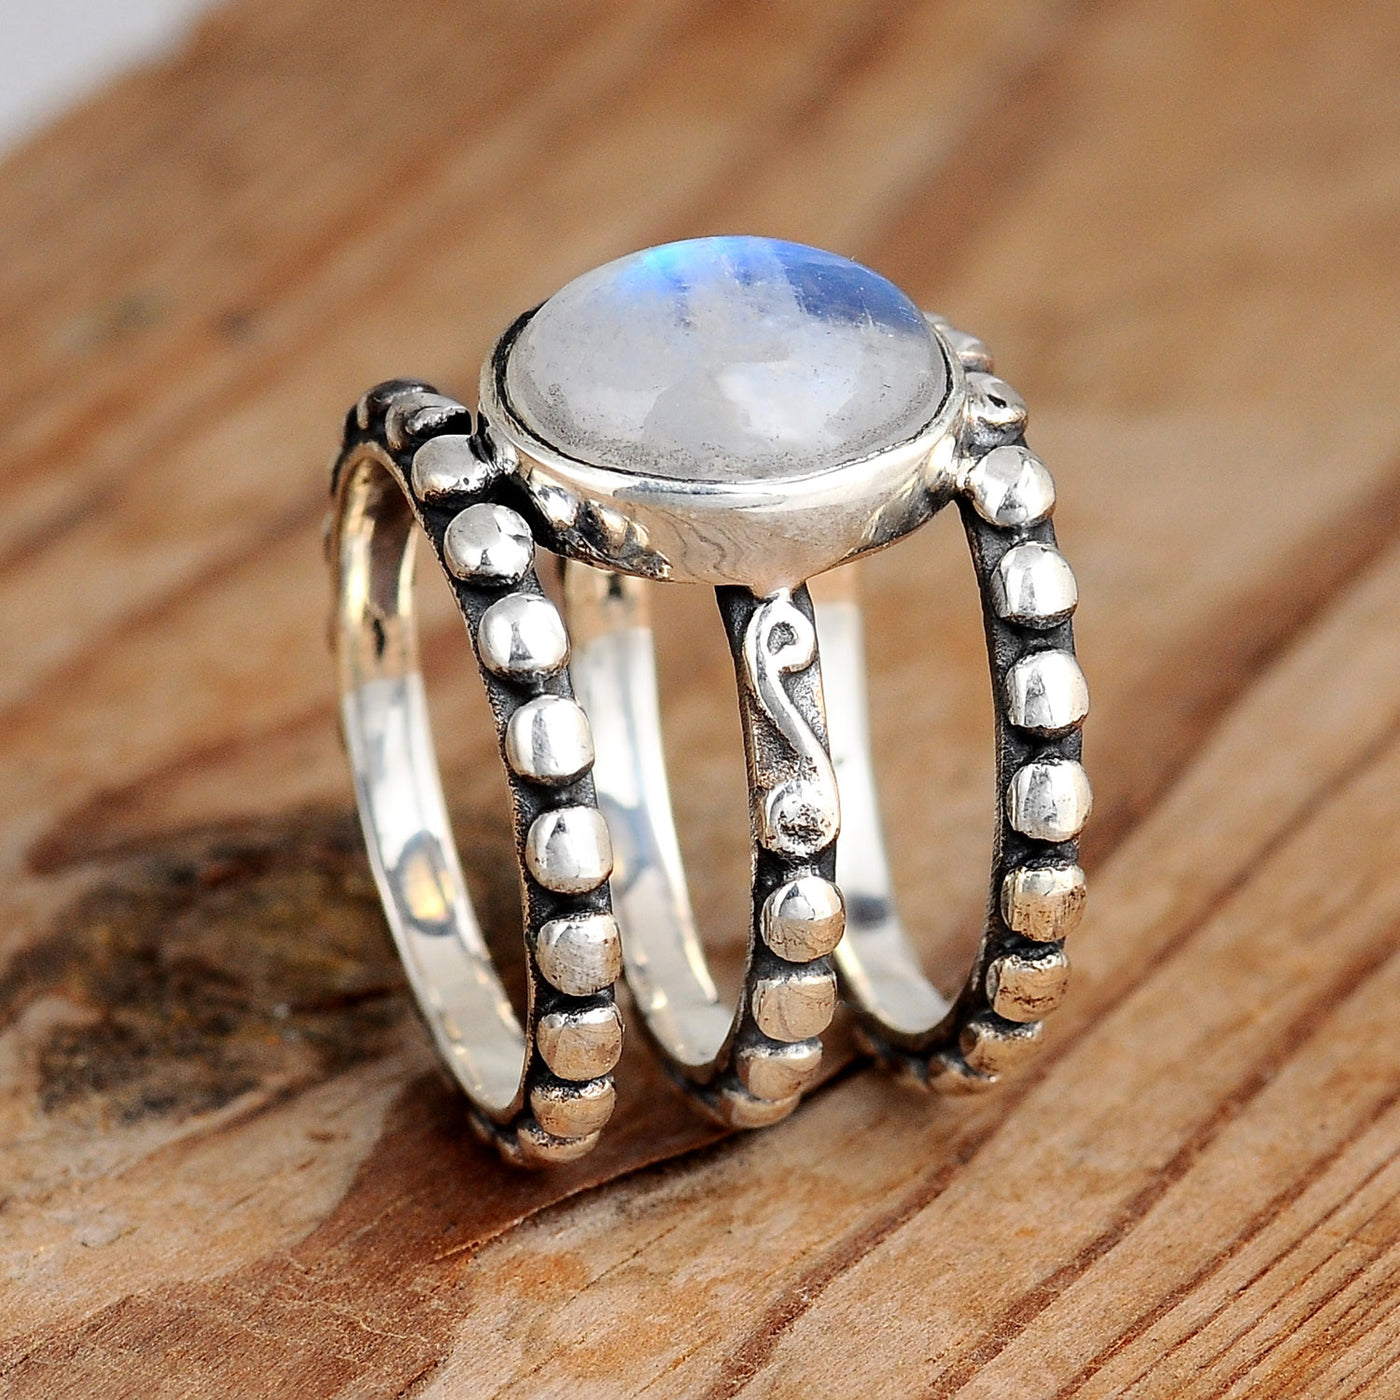 Large Rainbow Moonstone Ring Sterling Silver